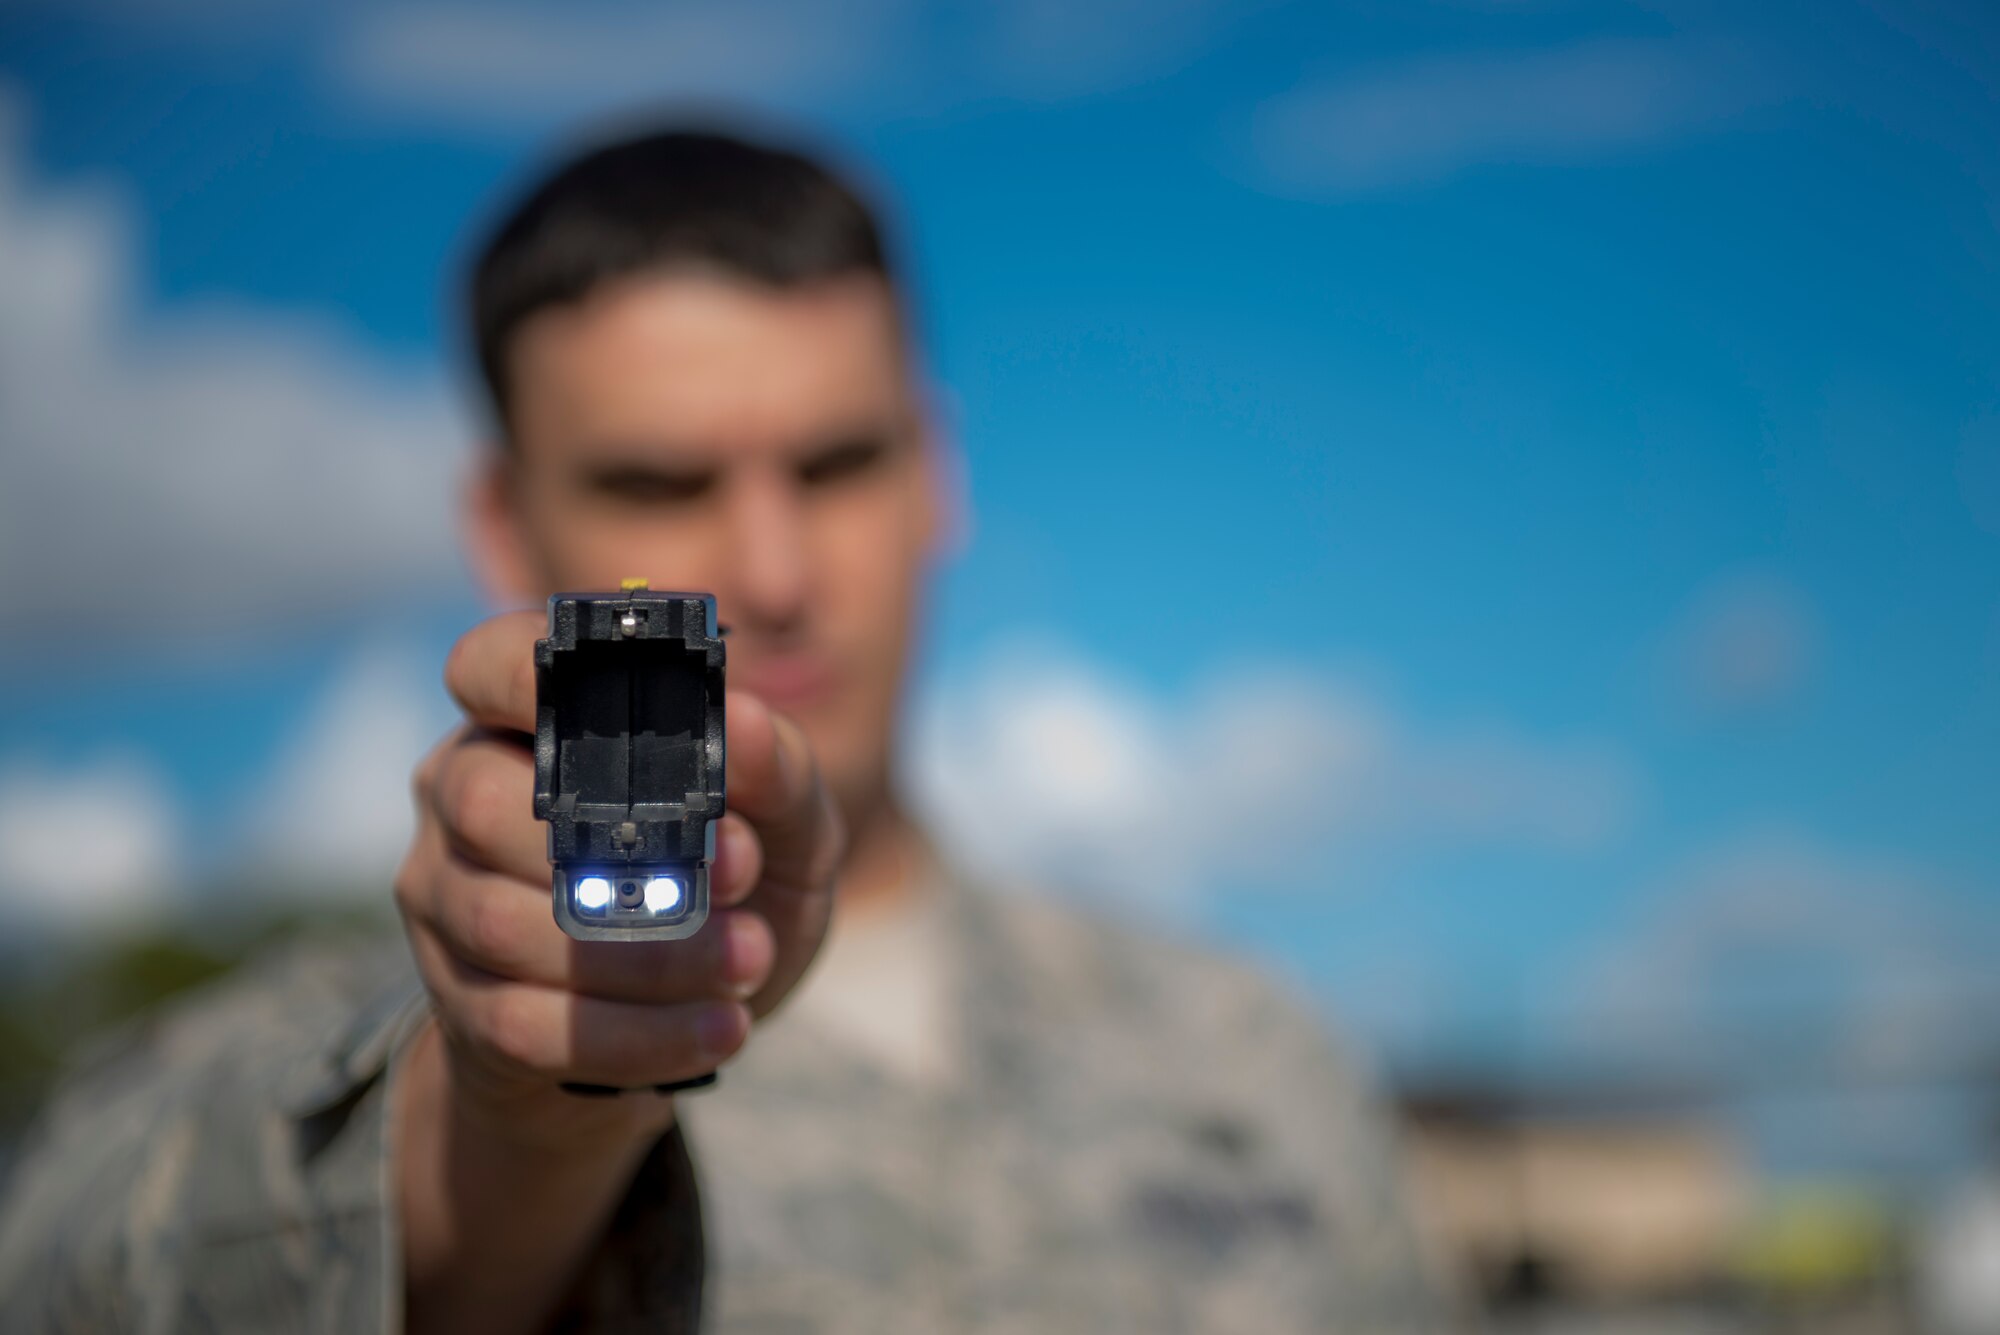 U.S. Air Force Senior Airman Joseph DiBianca, 23d Security Forces Squadron patrolman, aims a Taser Dec. 2, 2014, at Moody Air Force Base, Ga. Security Forces Airmen are required to complete Taser and OC pepper spray training as part of less-than-lethal combatives training. (U.S. Air Force photo by Airman 1st Class Dillian Bamman/Released)